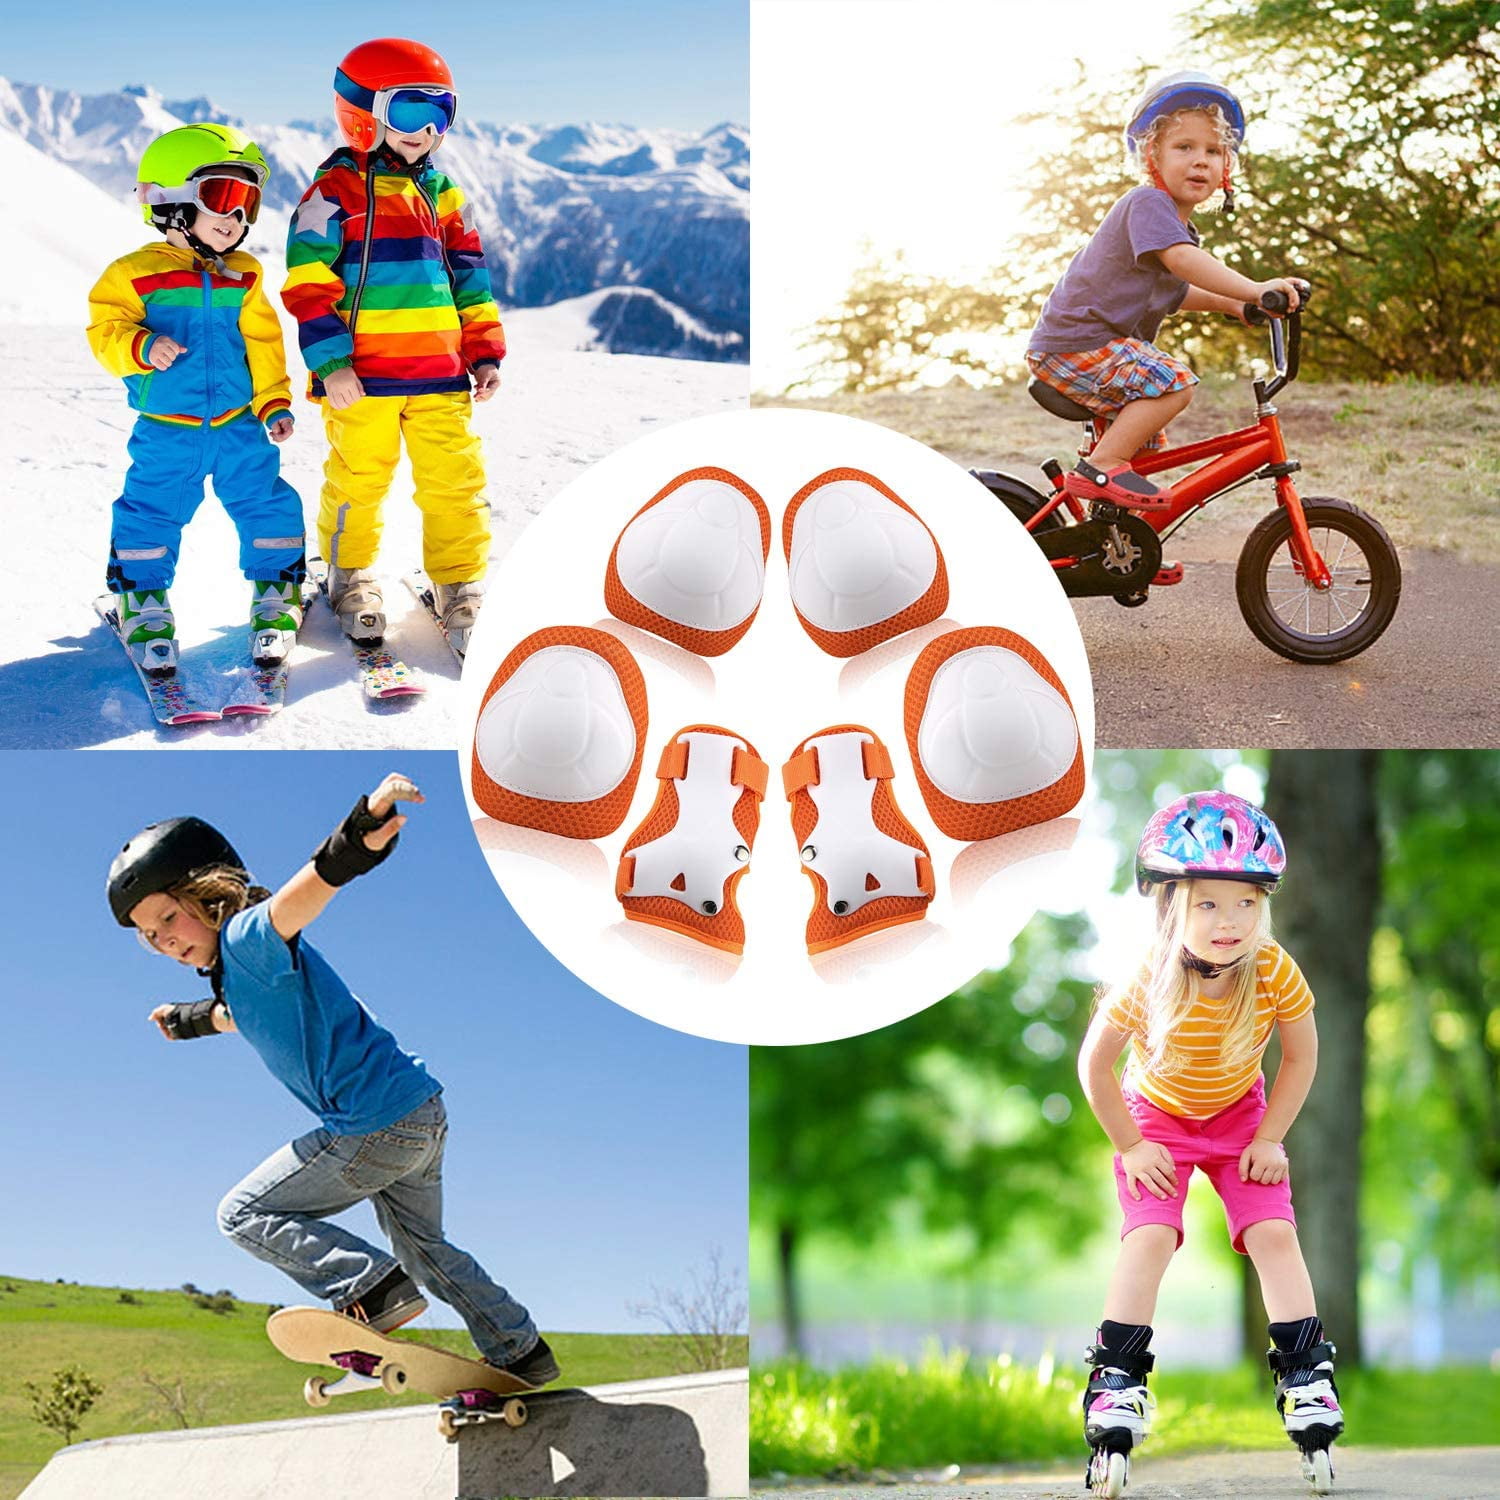 Kids Knee Pads Elbow Pads Ages 3-7 Toddler Boys Girls Kids 6 in 1 Protective Gear Safety Set with Wrist Guard for Skating Cycling Scooter Bike Ski Skateboard Riding Sports 